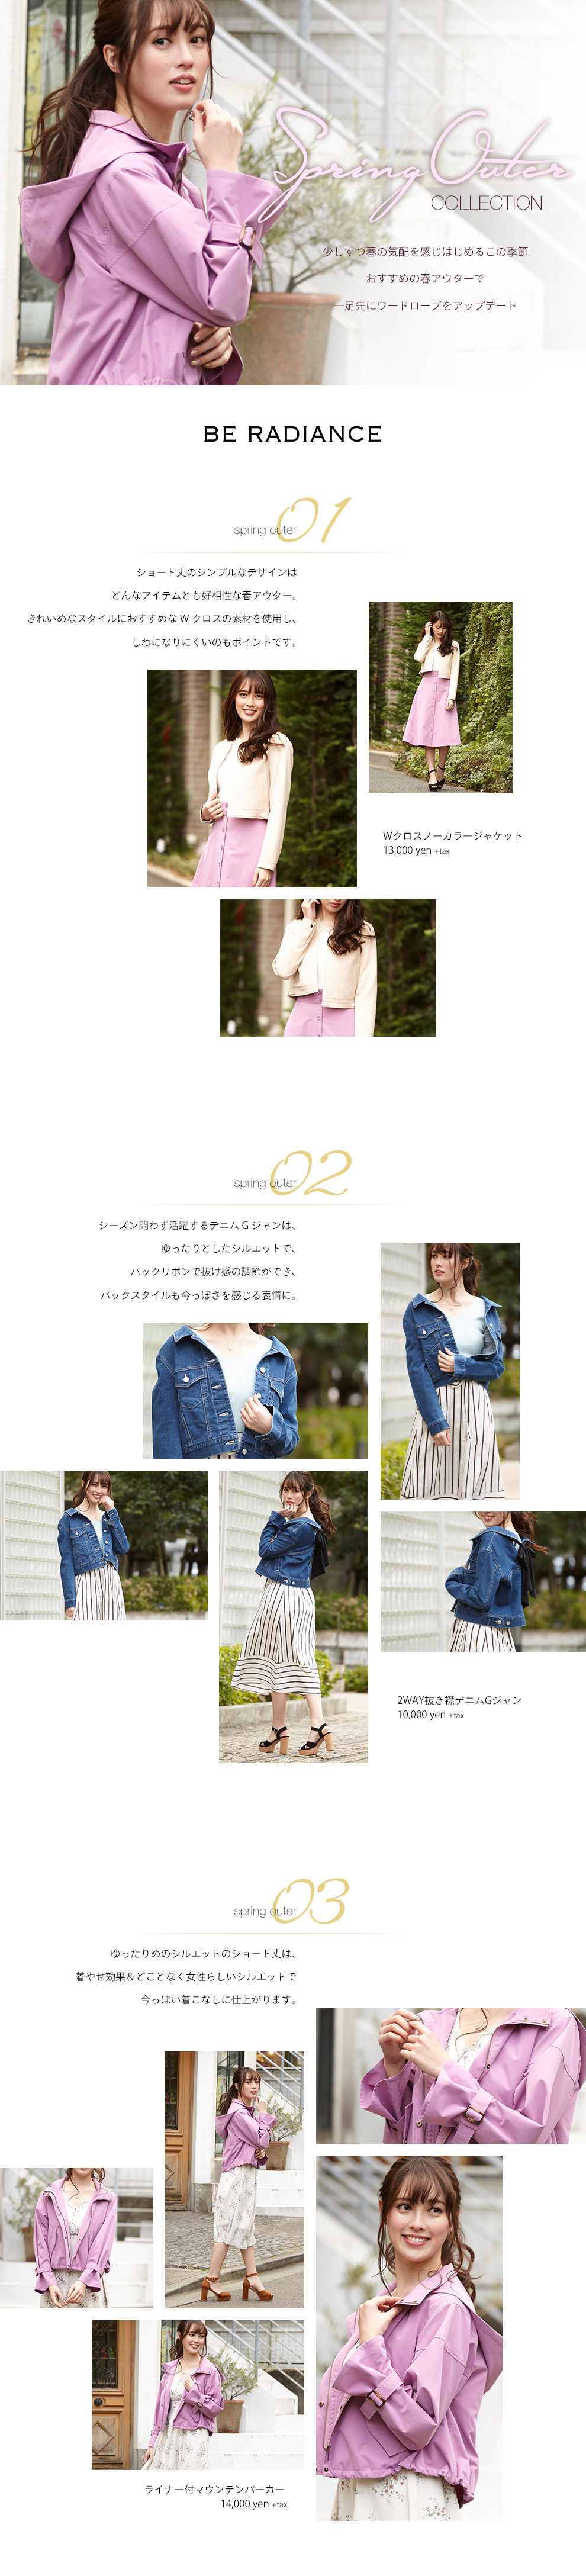 BE RADIANCE Spring Outer Collection